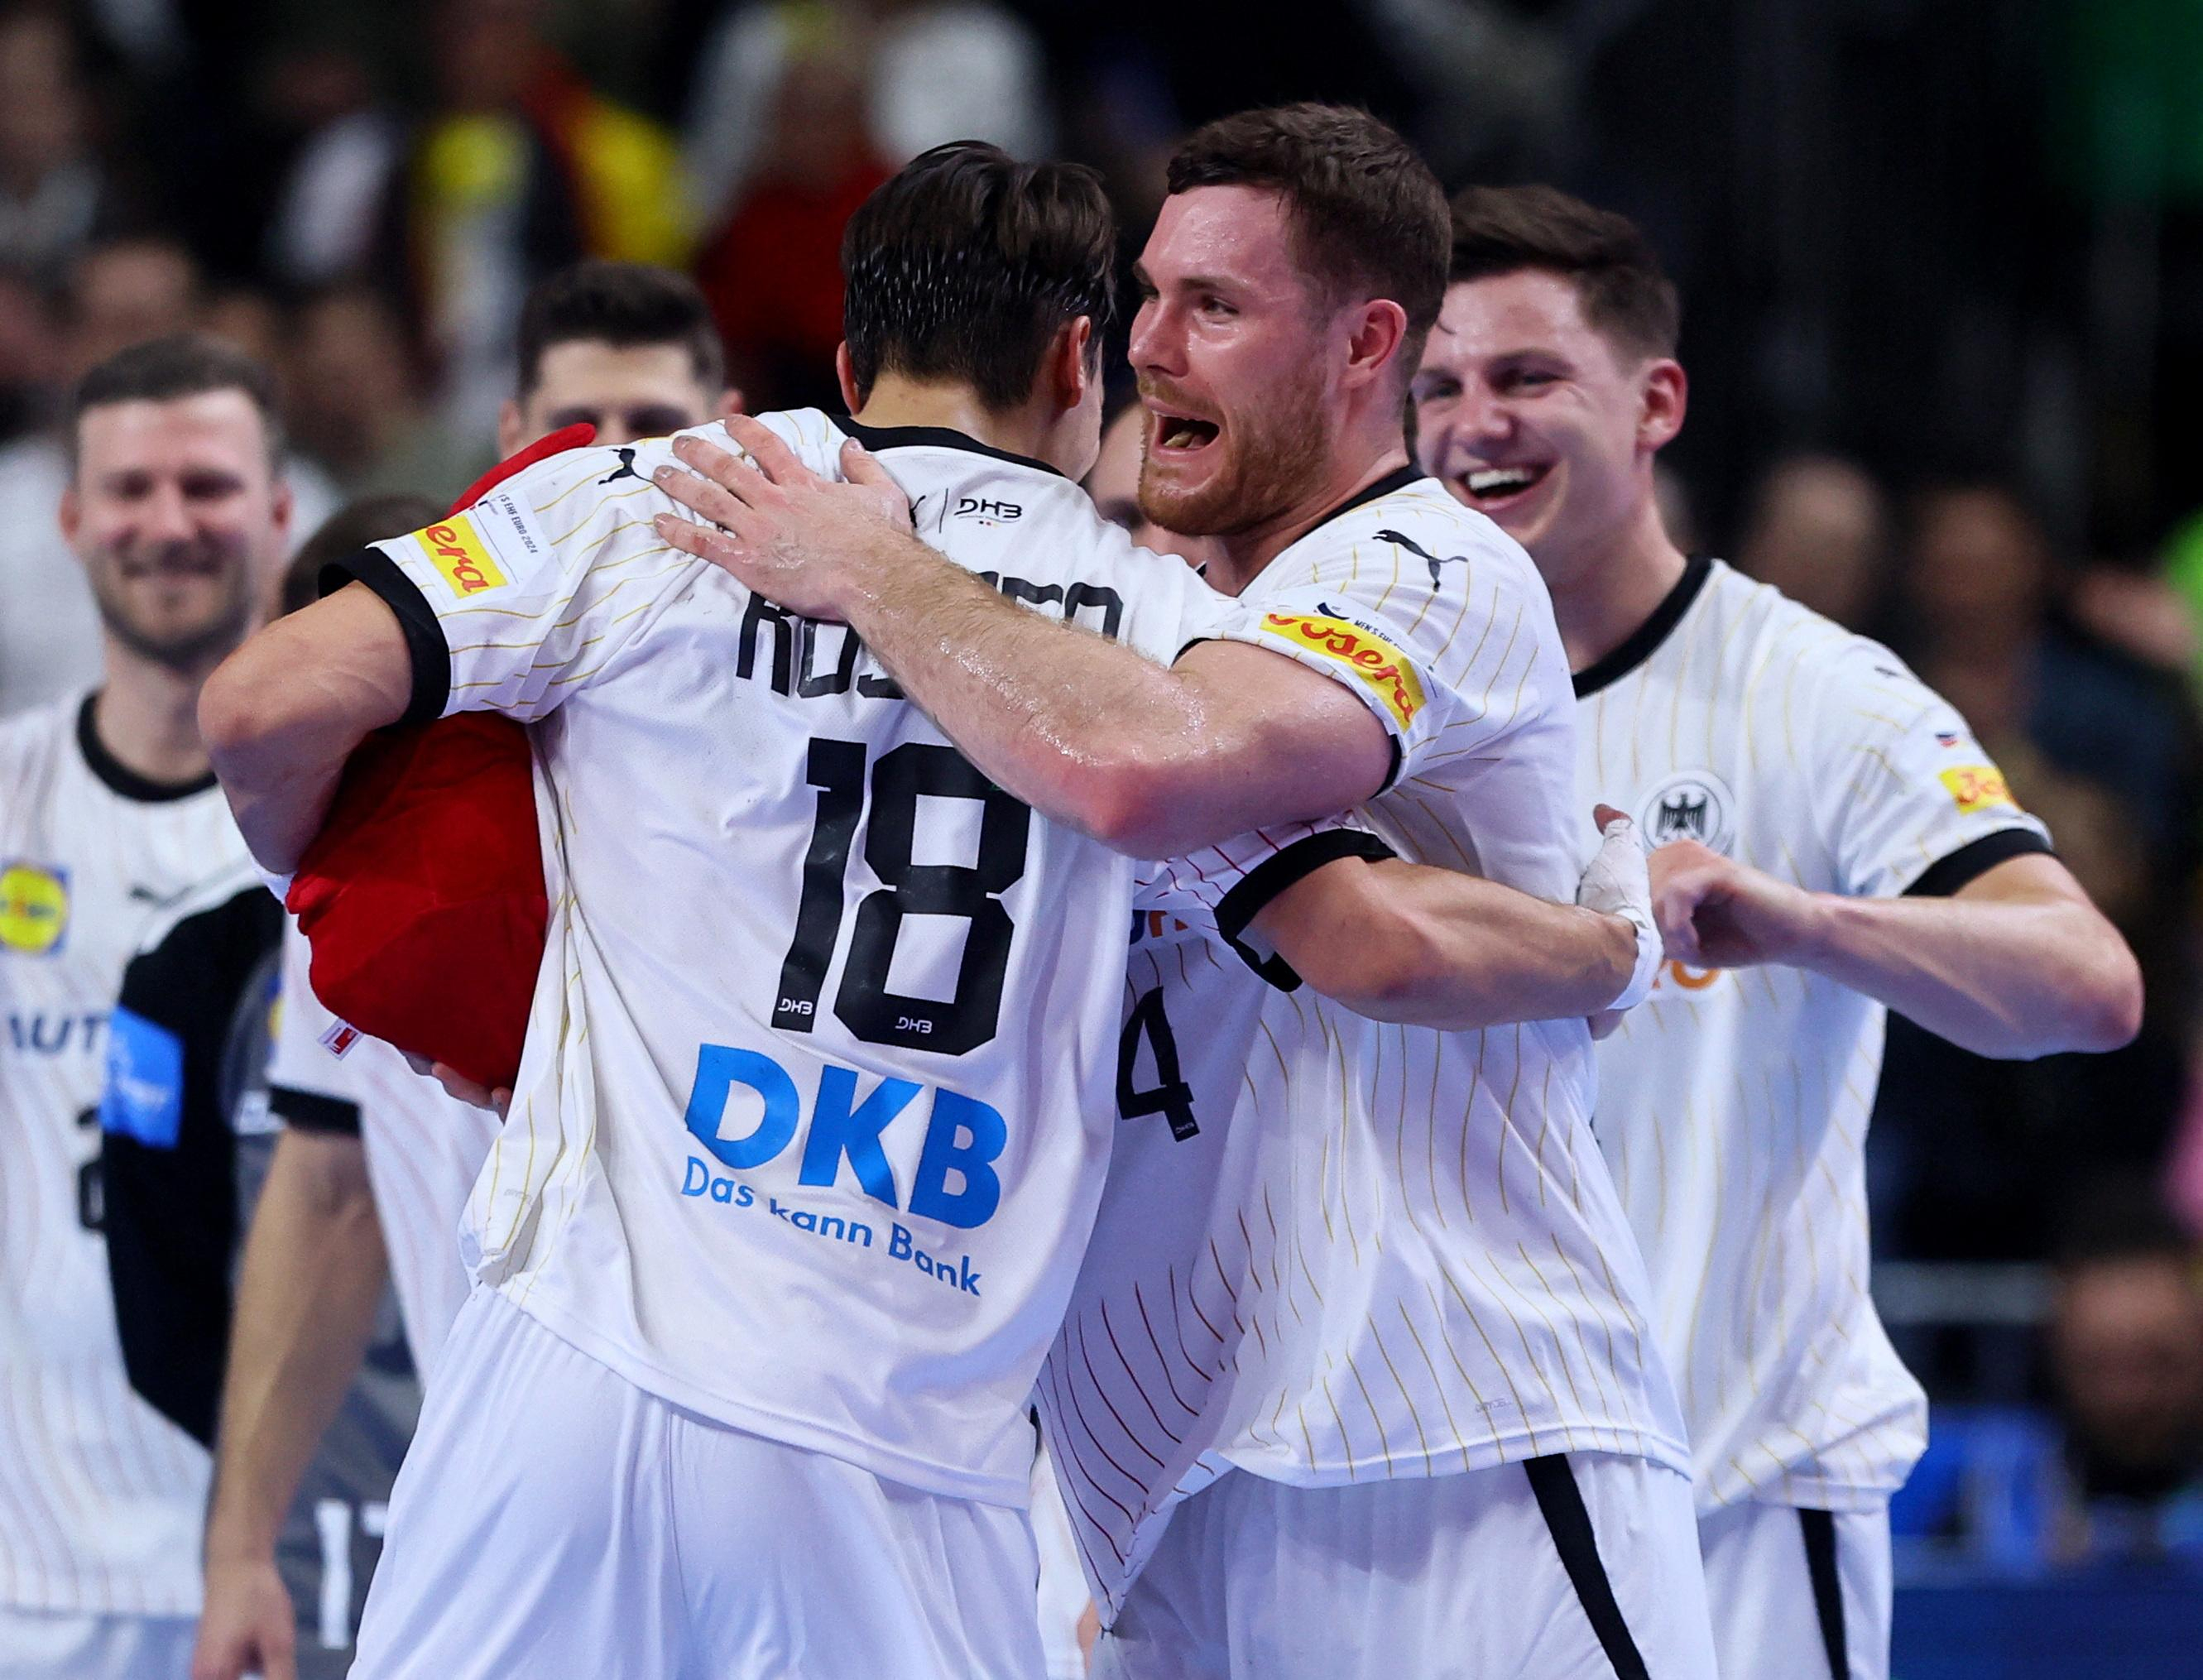 Euro handball: the Blues will face Sweden in the semi-finals, Germany remains alive